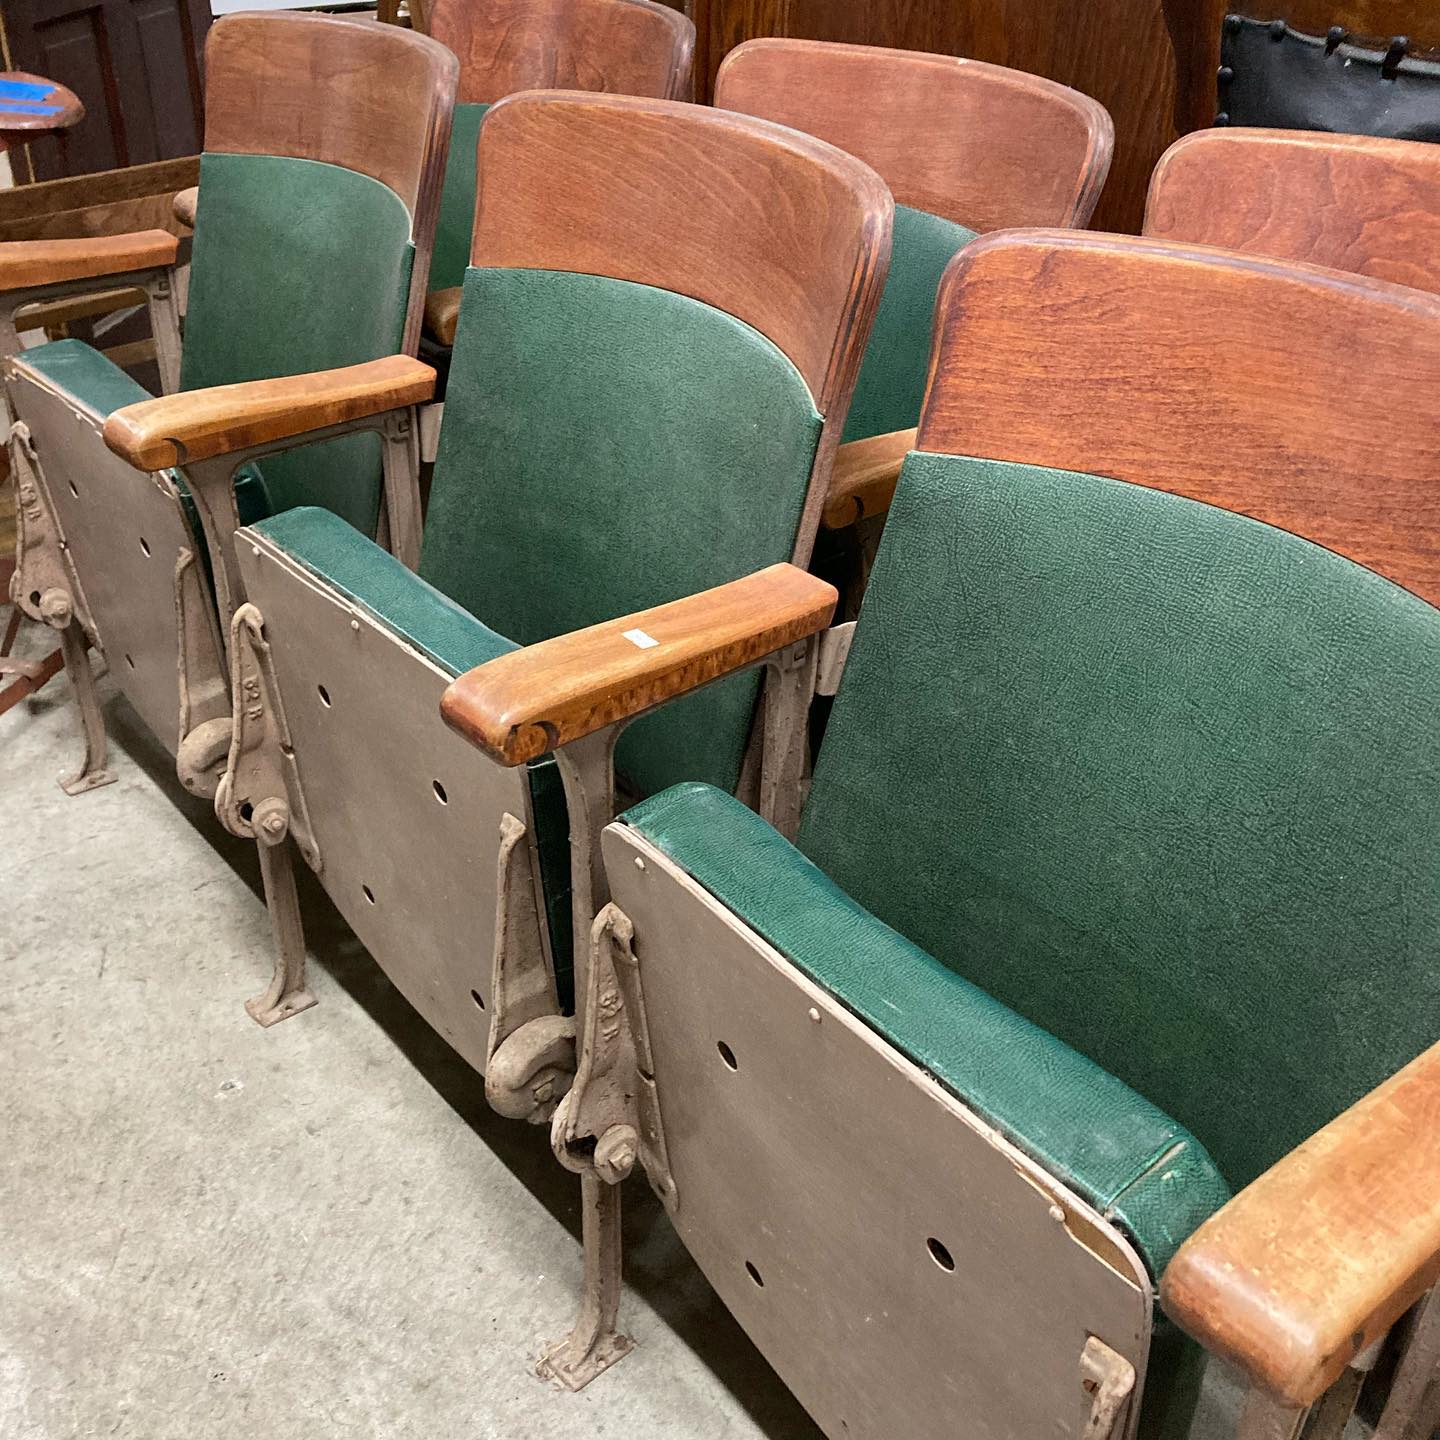 Antique Theatre Seats - Come in rows of 2, 3 or 4 seats